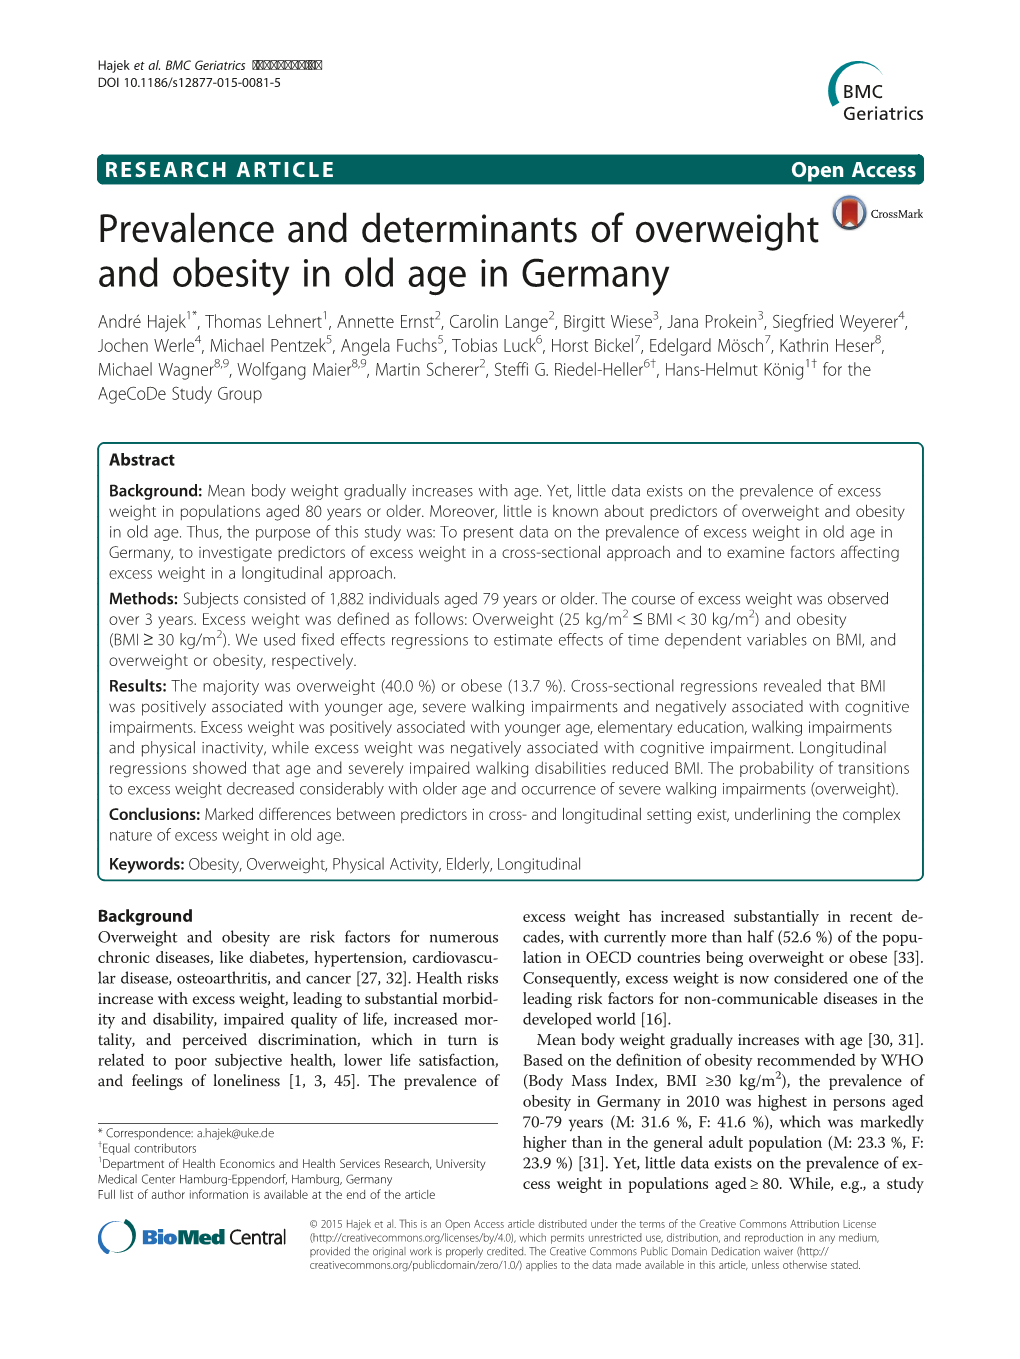 Prevalence and Determinants of Overweight and Obesity in Old Age